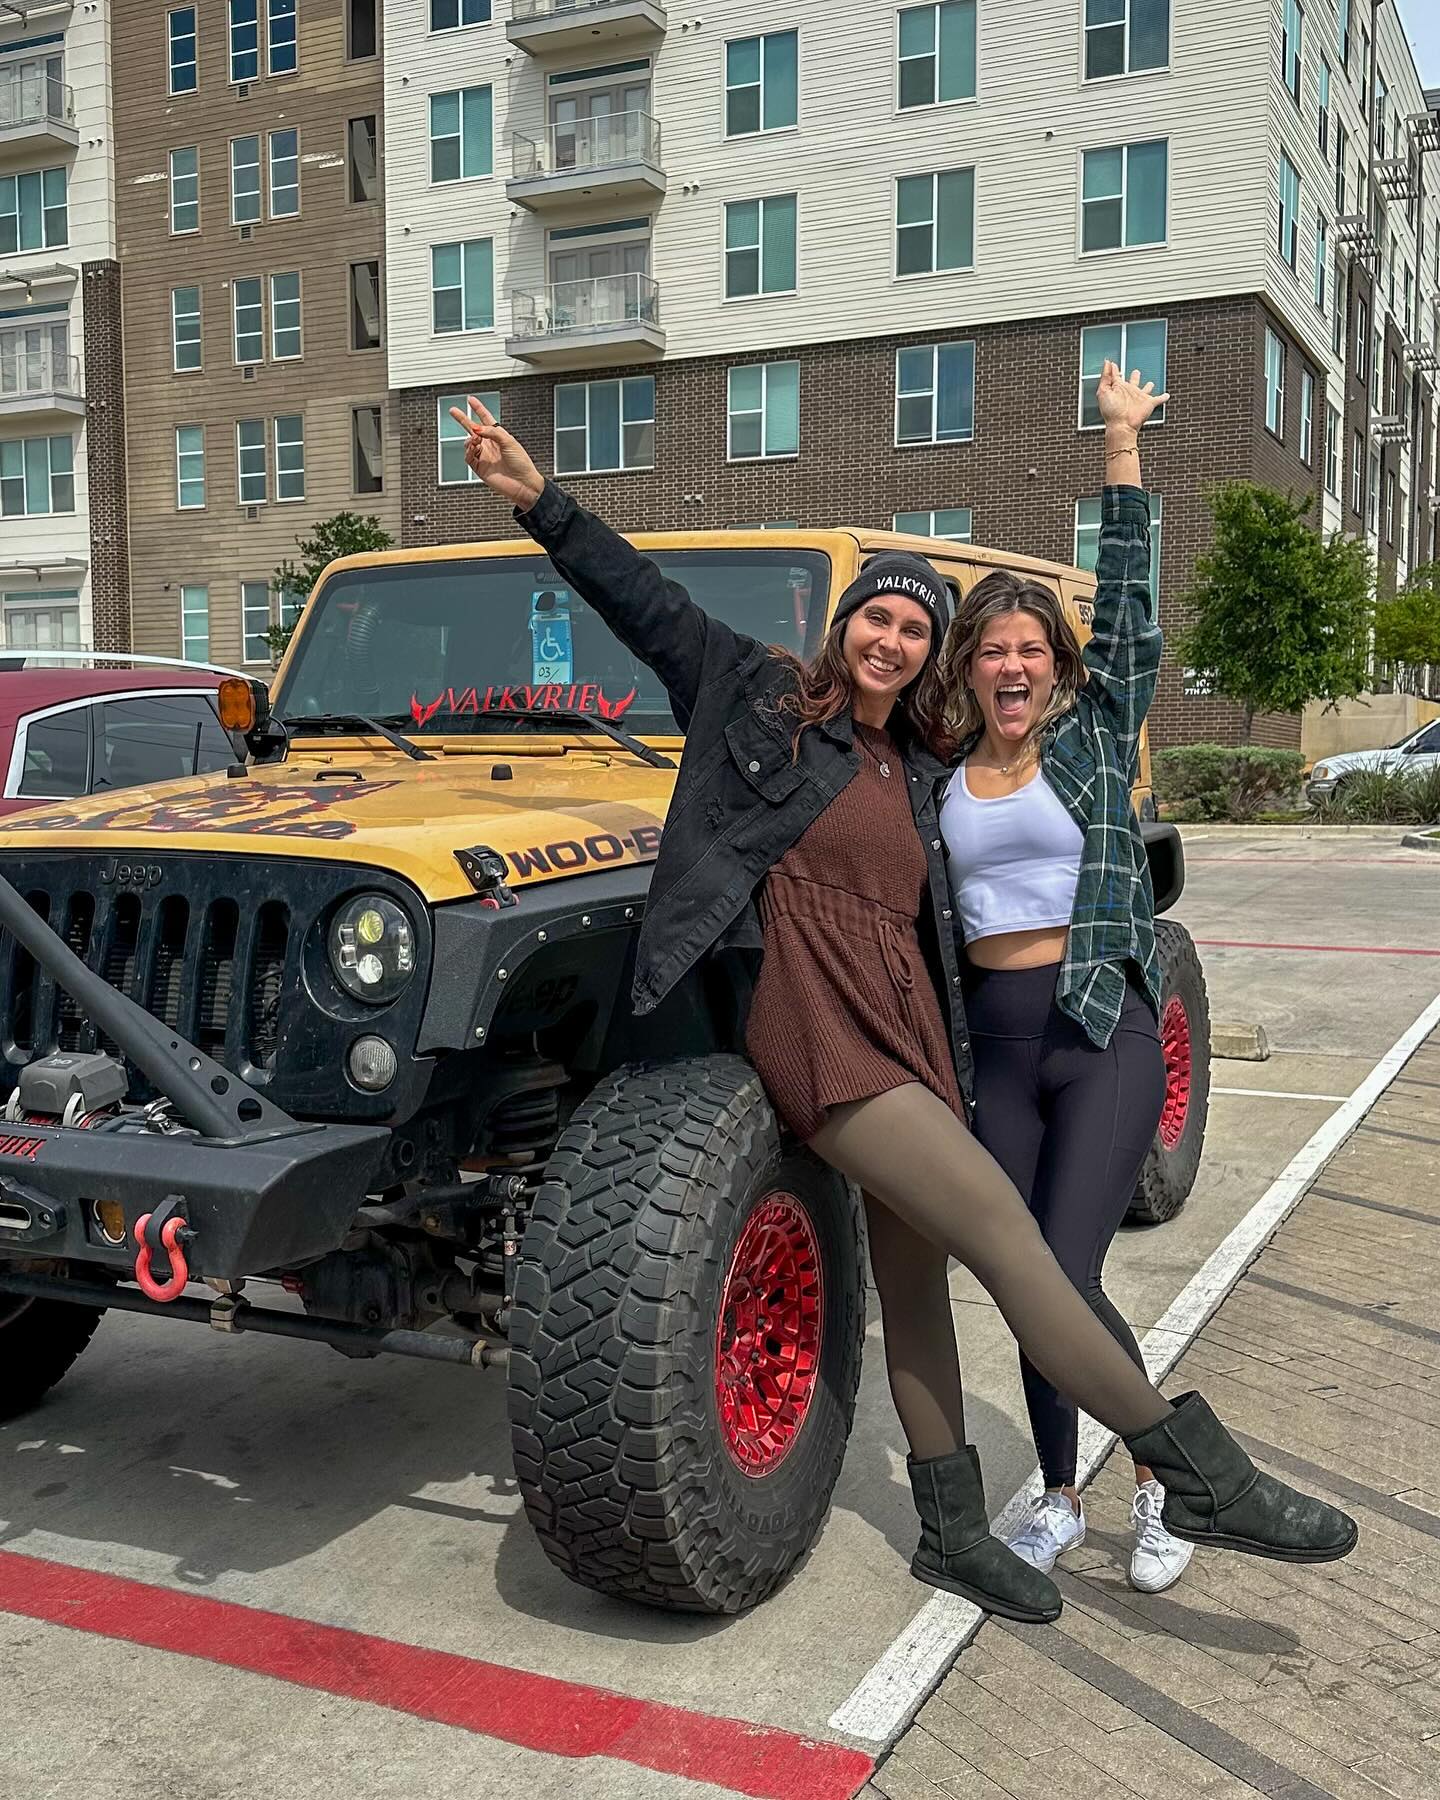 Finally got the chance to meet up with the beautiful soul @pippey10! Maybe next time we will have our own jeeps 😝

#bringbacksecrets

I’m so happy you’re here 🖤

My favorite pages
@valkyrie.jeep.club
@northtexasjeepclub
@canyon.state.jeeps.and.offroad
@gearheadcoffeeco - VALKYRIE
@clearlidz_jeeps - DODGER 
@jedcogear - DODGER
@barricadeoffroad - 5BAR0953
@wethepeopleholsters - DODGERJEEP15
@vakandiapparel - dodgerjeep15
@wickedprotein - sara10
@grippgear - sara20
@stinger_offroad - DODGER

#Jeep #jeeplife #jeepgirls #jeepthing #4x4together #4x4ever #4x4barbie #4x4girl #friends #girlfriends #jeepfriends #myfriendsarebetterthanyours #friendshipgoals #Babe #Babesofinsta #Babesofinstagram #Babessupportingbabes #Babestatus #Babethings #Bombshell #Bombshellbabe #Bombshells #Instagood #Fitbabe